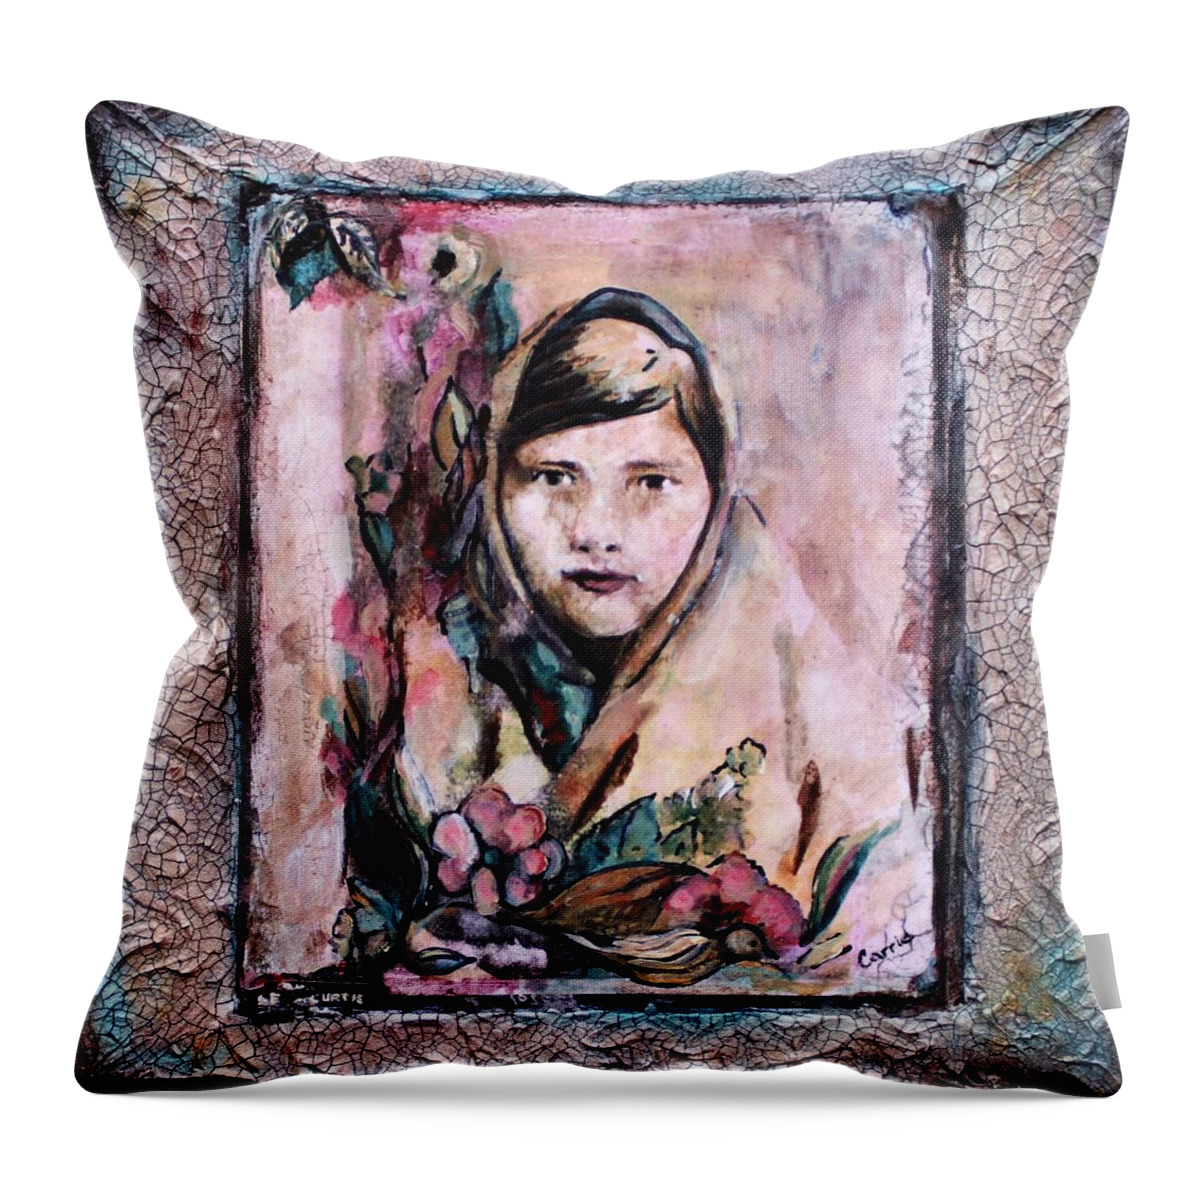  Figure Throw Pillow featuring the mixed media Intent by Carrie Joy Byrnes